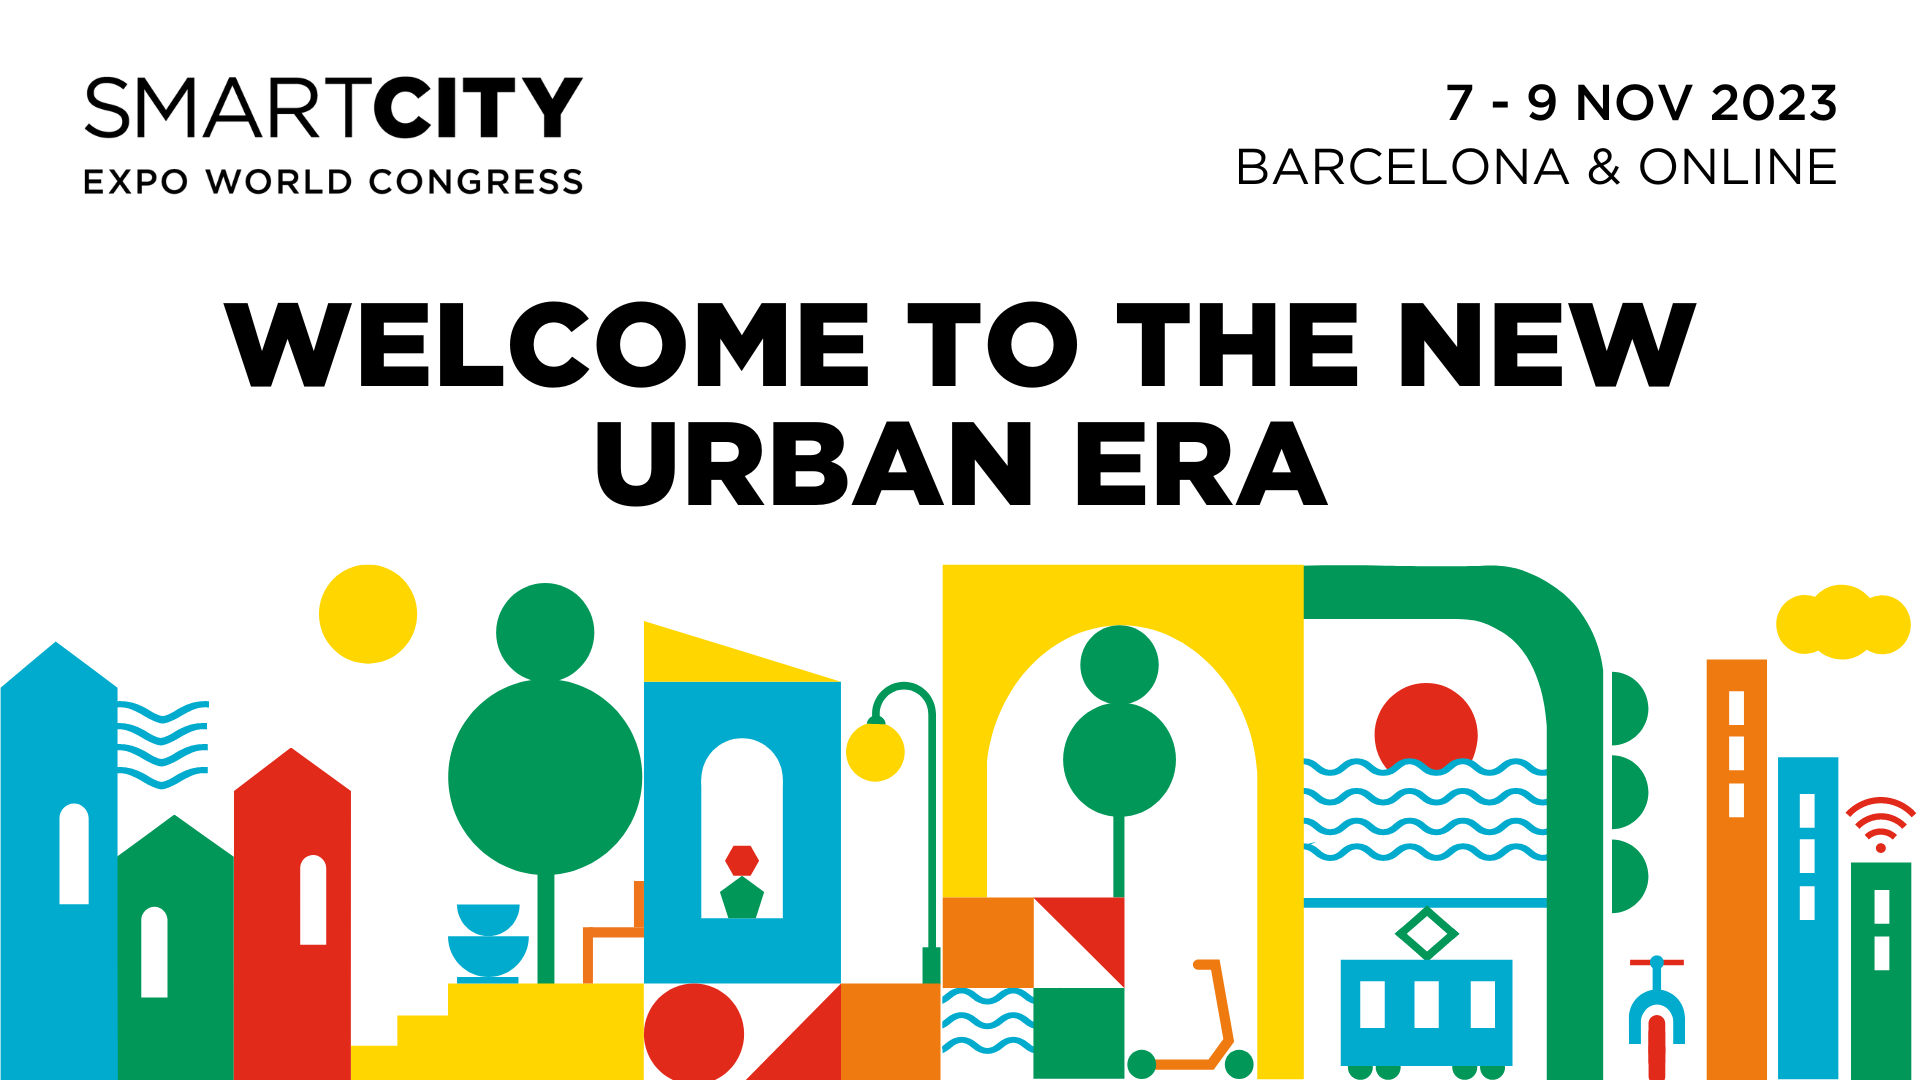 Welcome to the new era - smart city world expo. Text comined with colourful icons